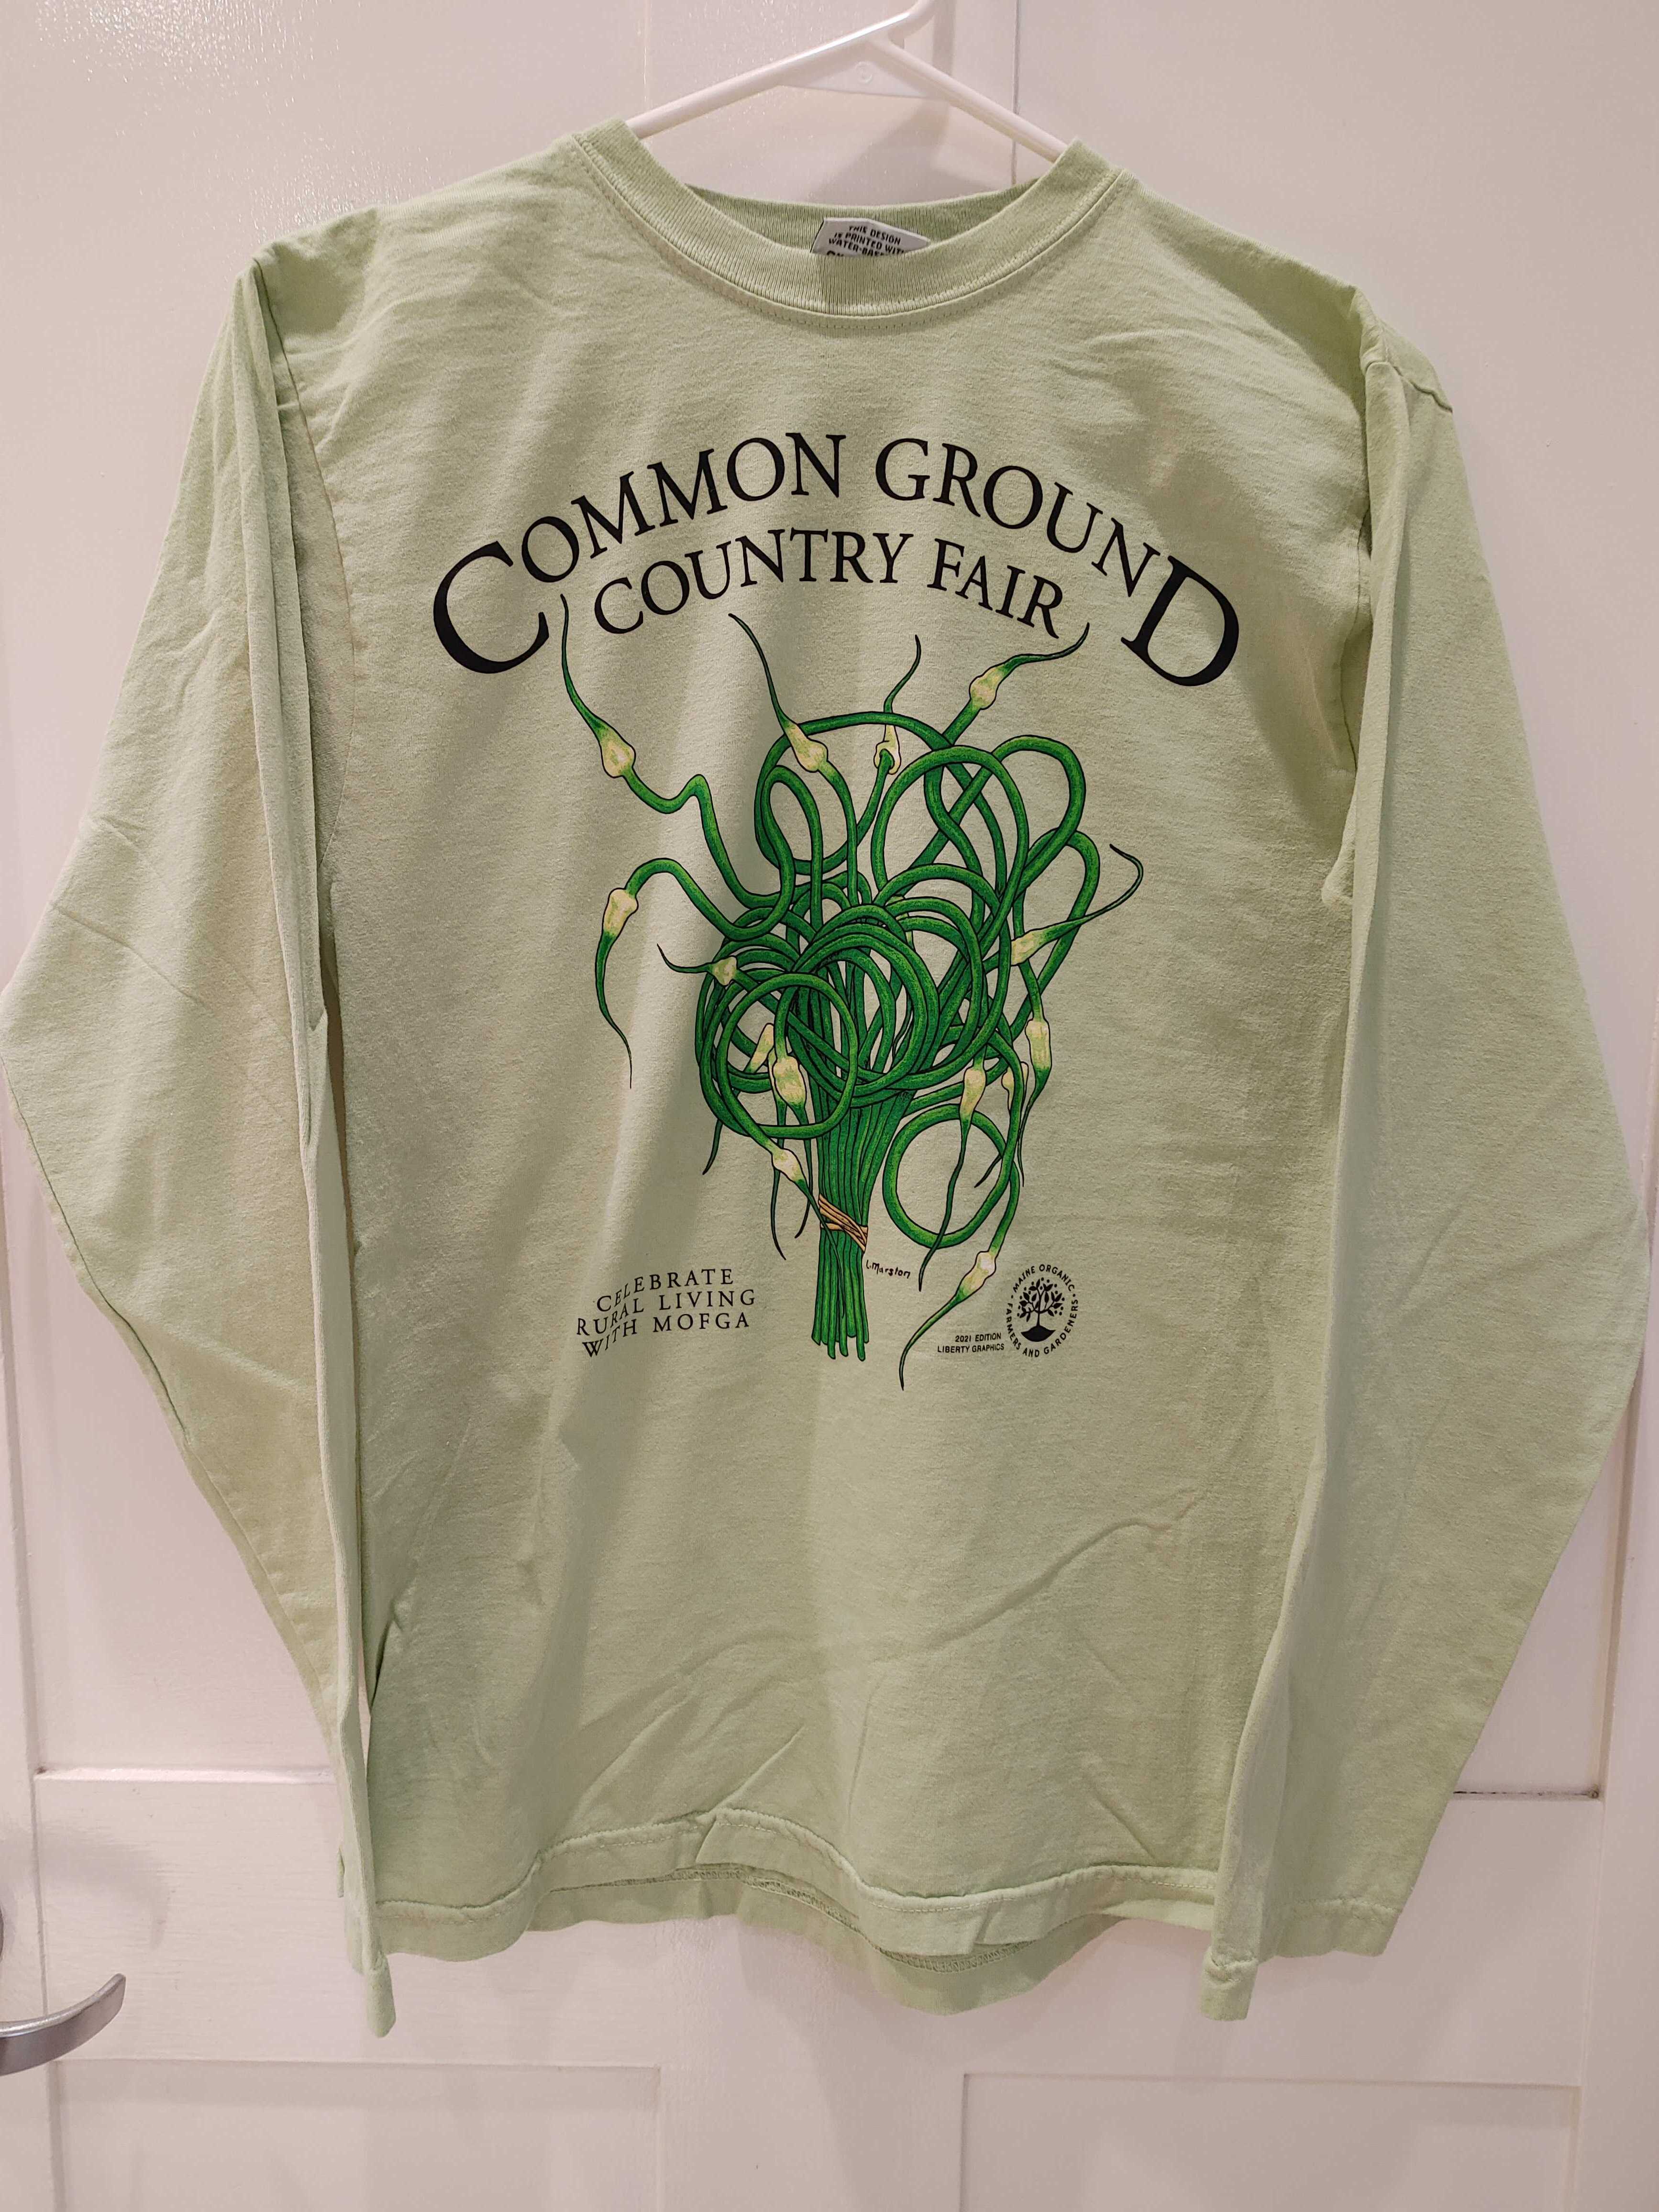 A light brown long sleeved shirt with artwork in the center depicting a cluster of green and cream garlic scapes bound with brown twine at the bottom. Black text around art reads “Common Ground Country Fair” and  “Celebrate Rural Living with MOFGA”. A black MOFGA logo is in the bottom right corner. 